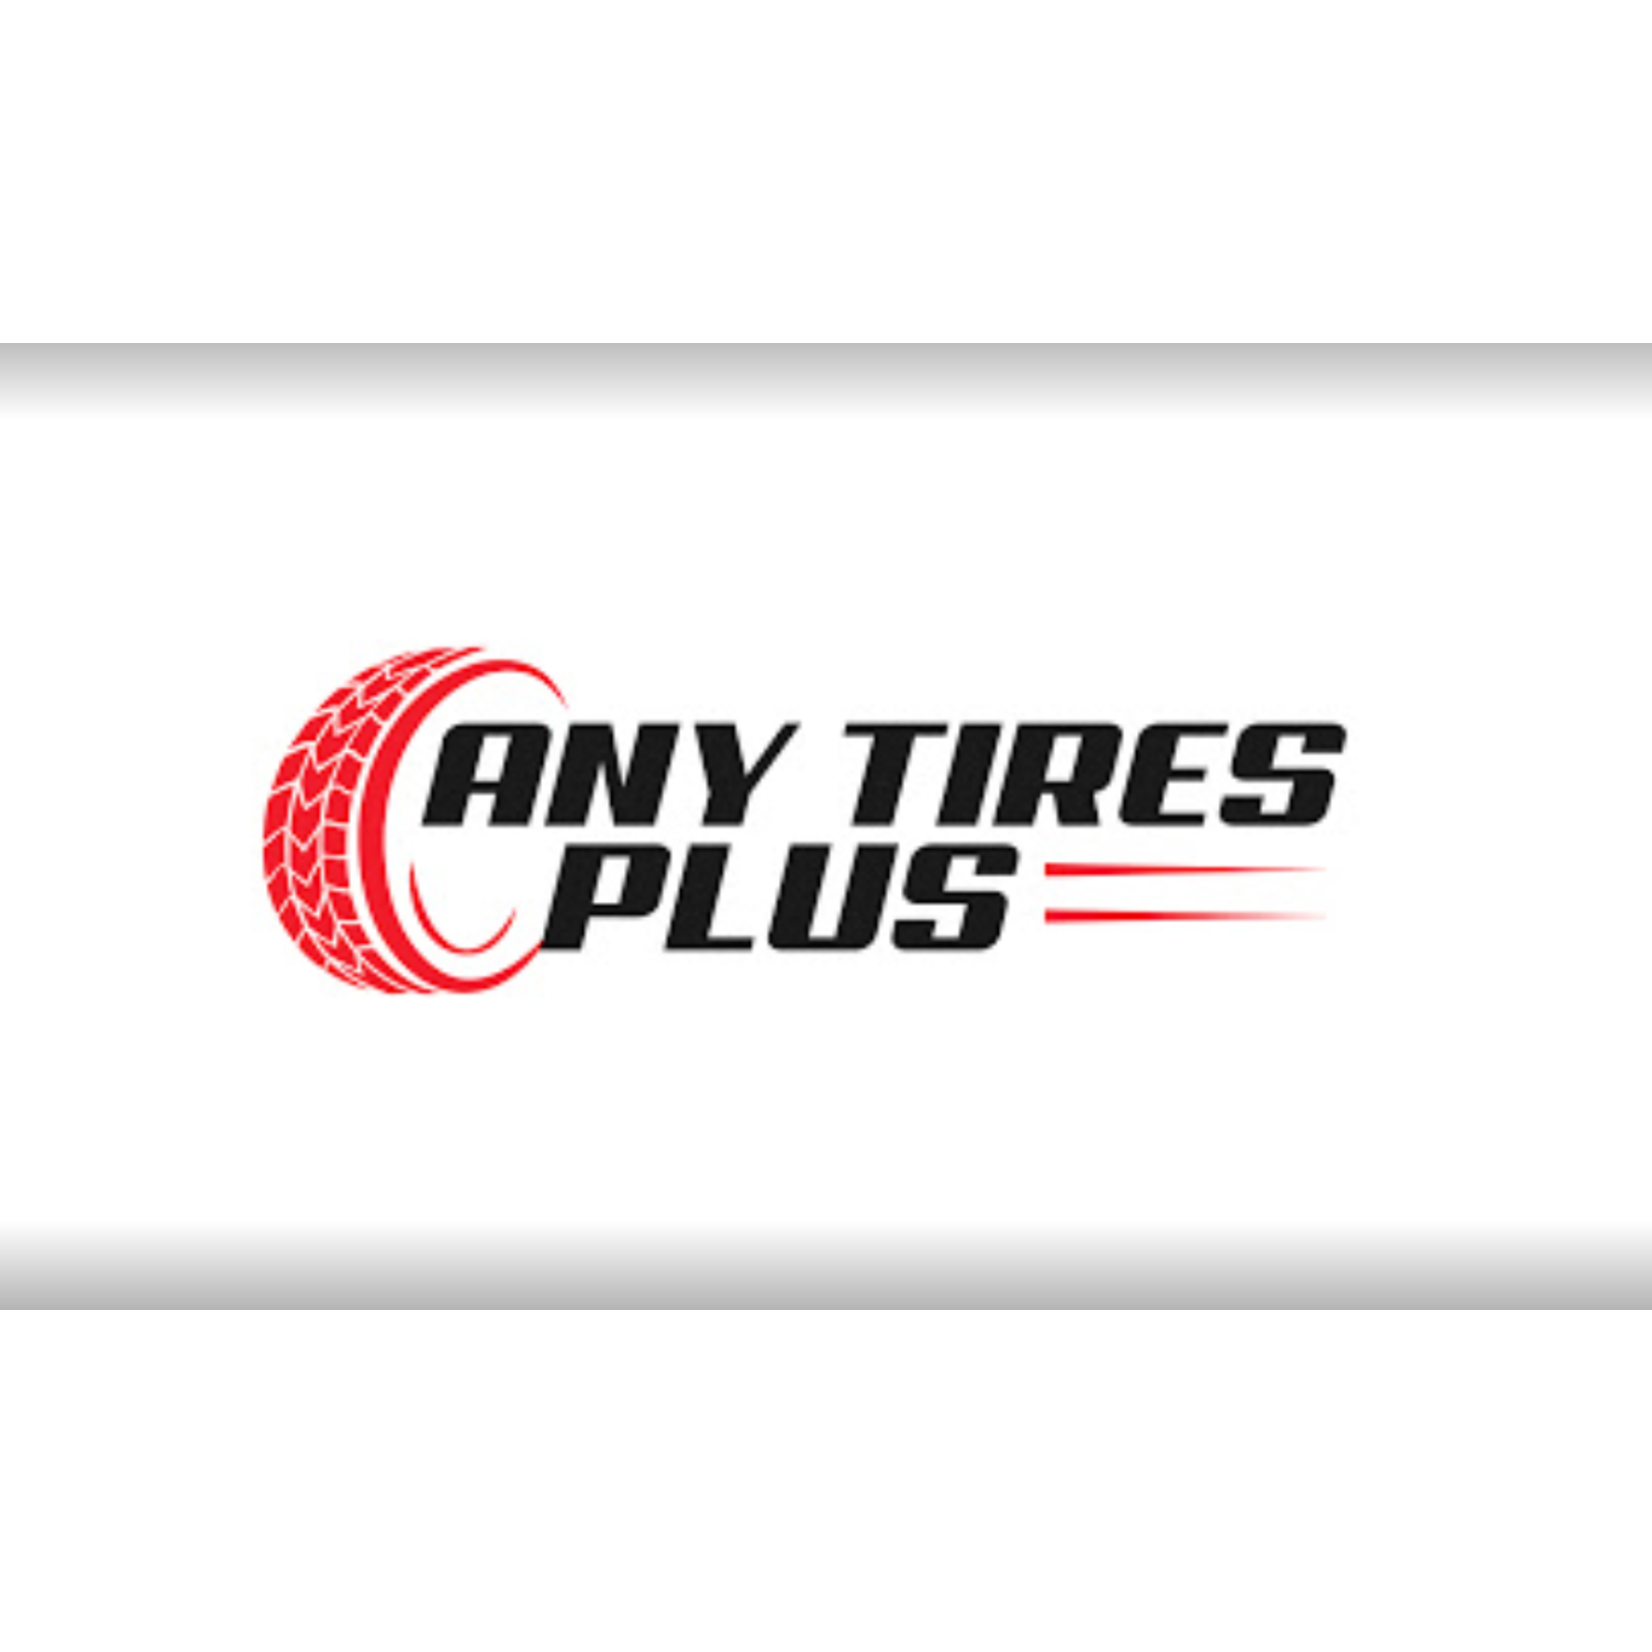 Any Tires Plus Any Tires Plus $40 - (4) Wheel Tire Rotation & Balance